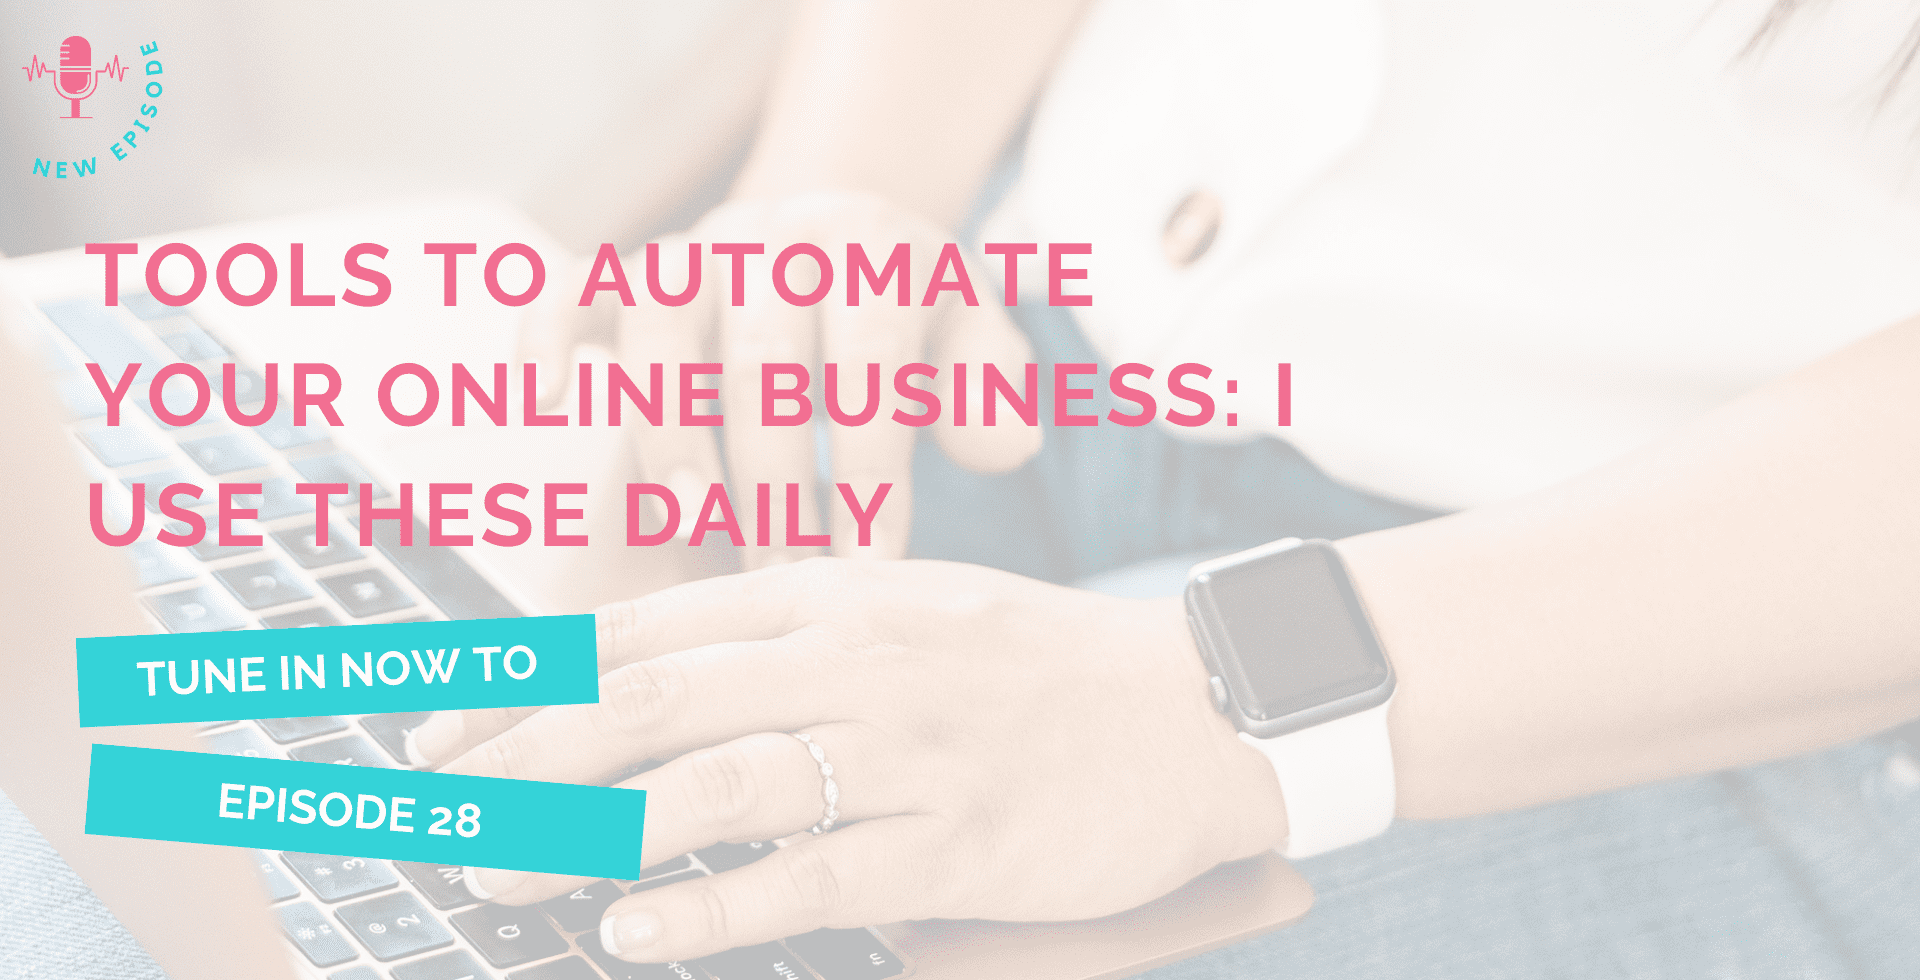 Tools to Automate Your Online Business: I Use These Daily